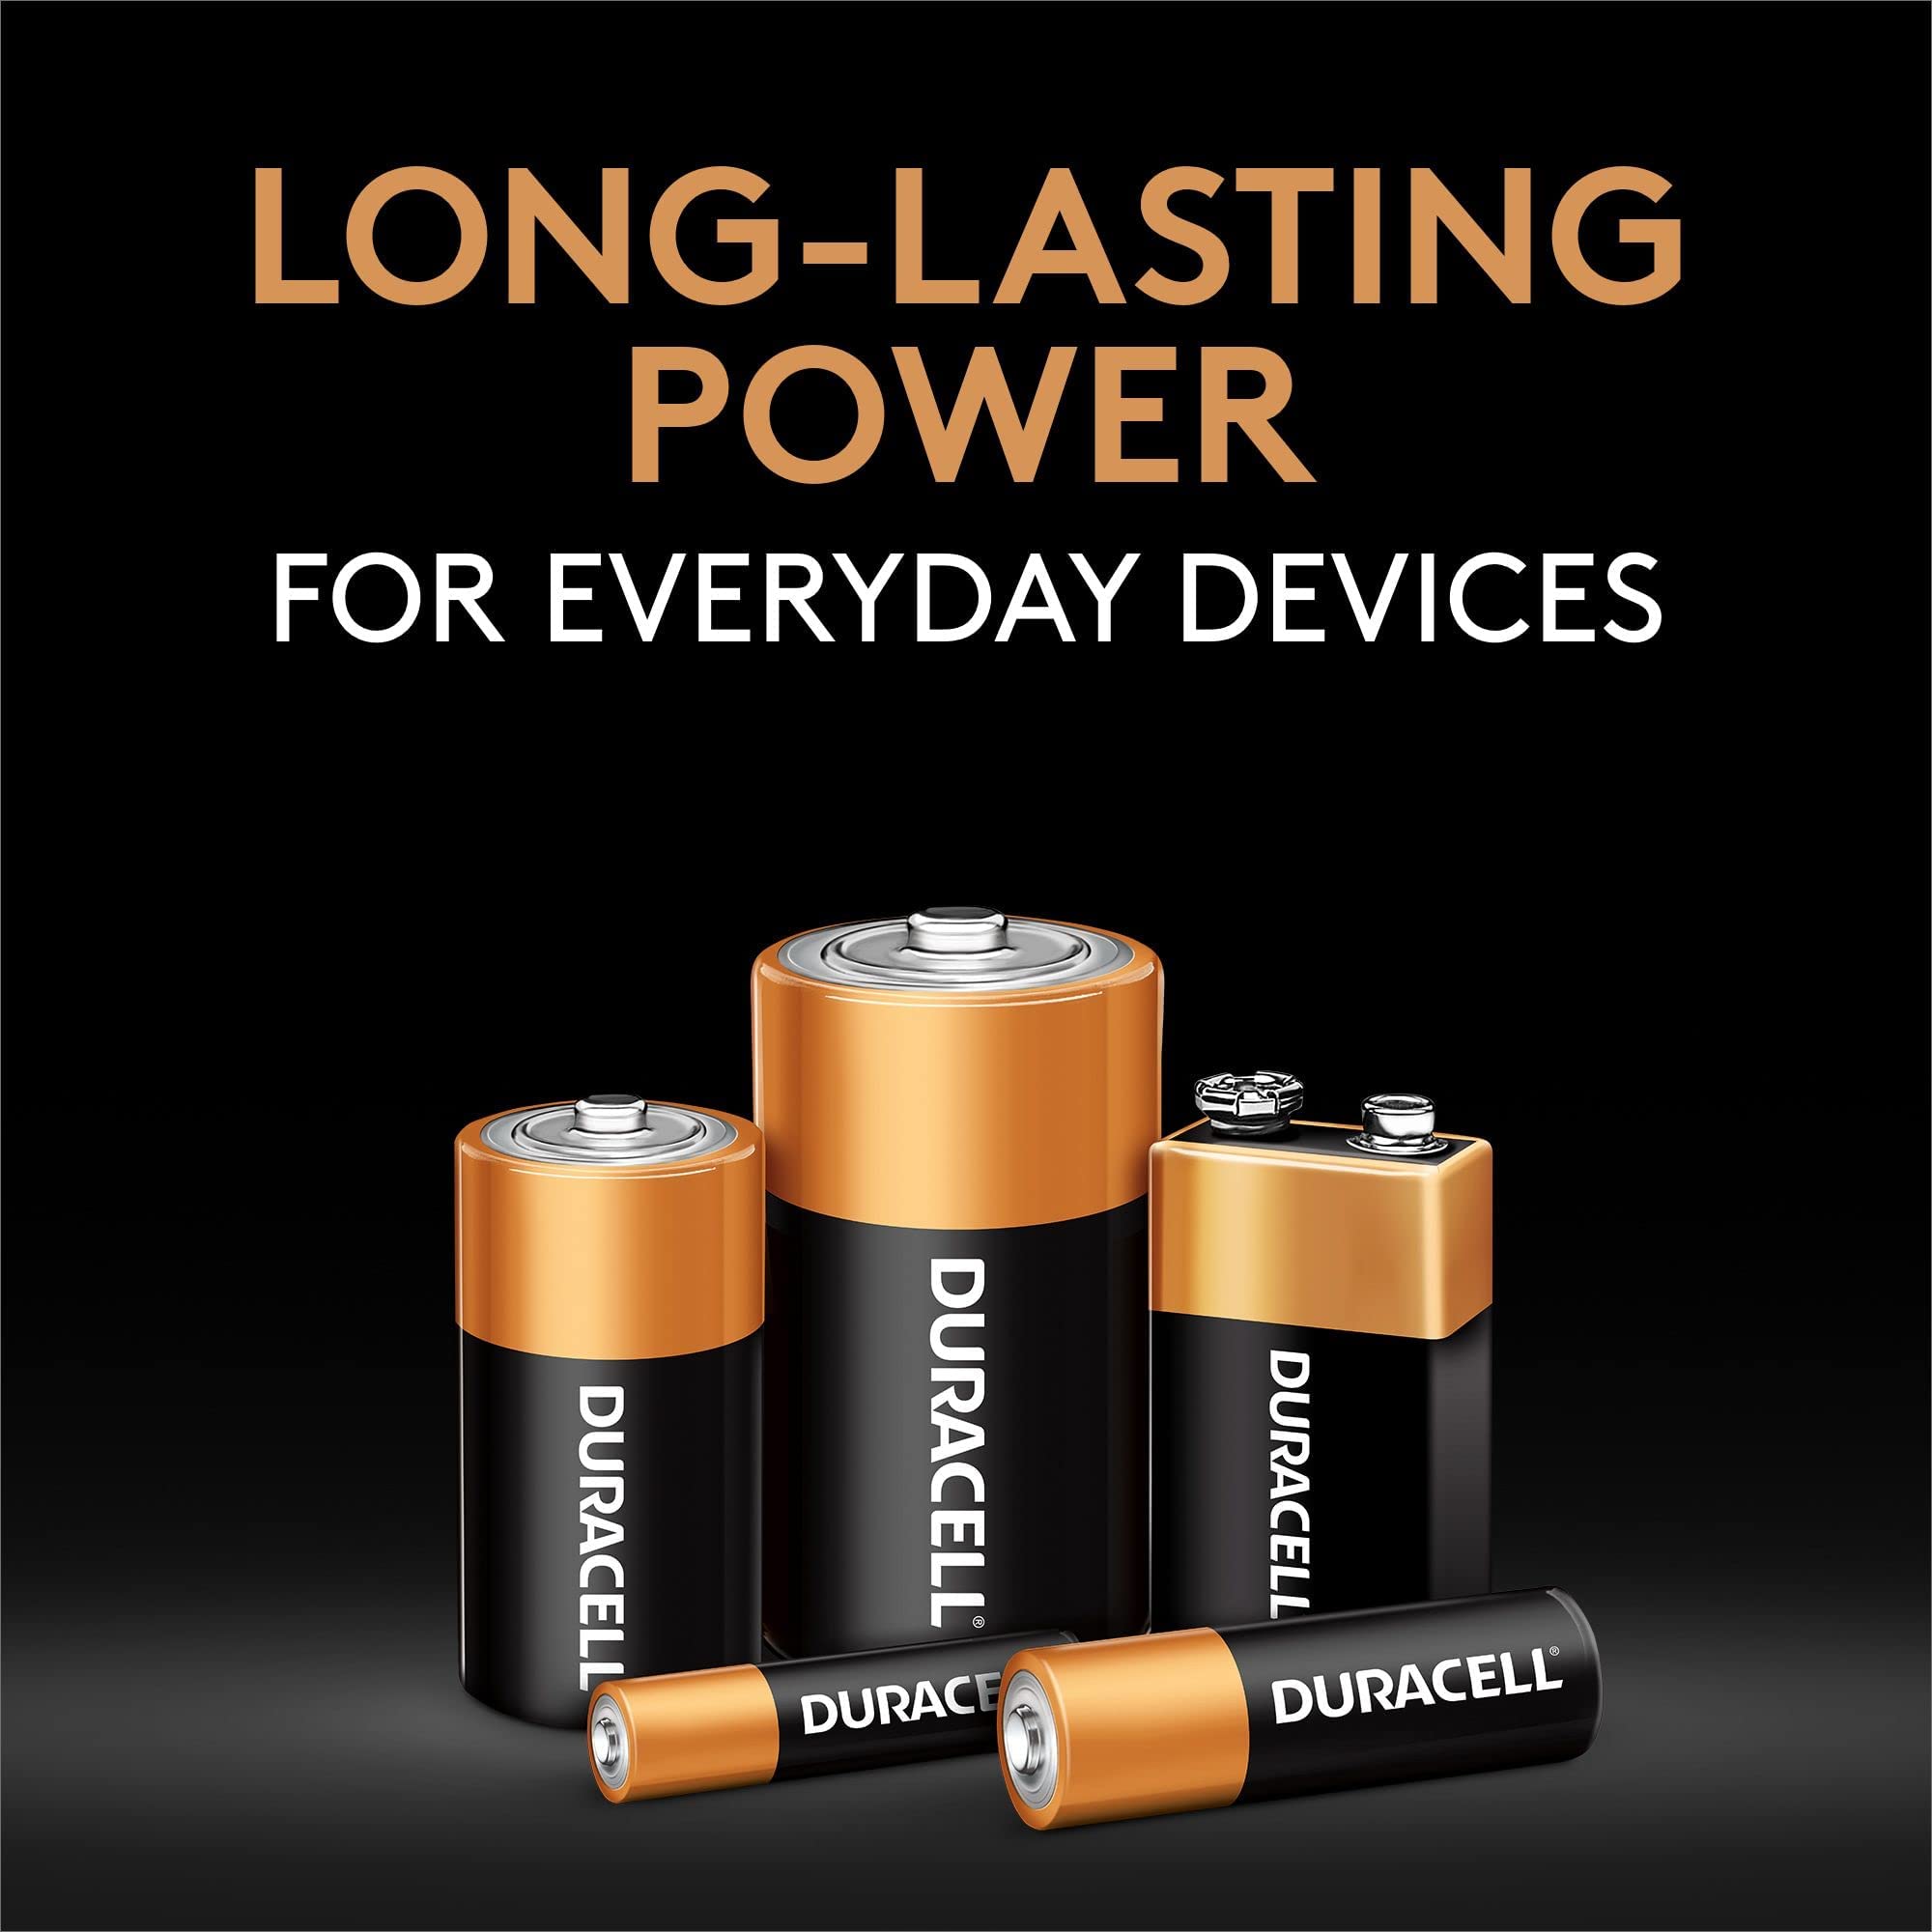 Duracell Coppertop C Batteries, 4 Count Pack, C Battery with Long-lasting Power, All-Purpose Alkaline C Battery for Household and Office Devices